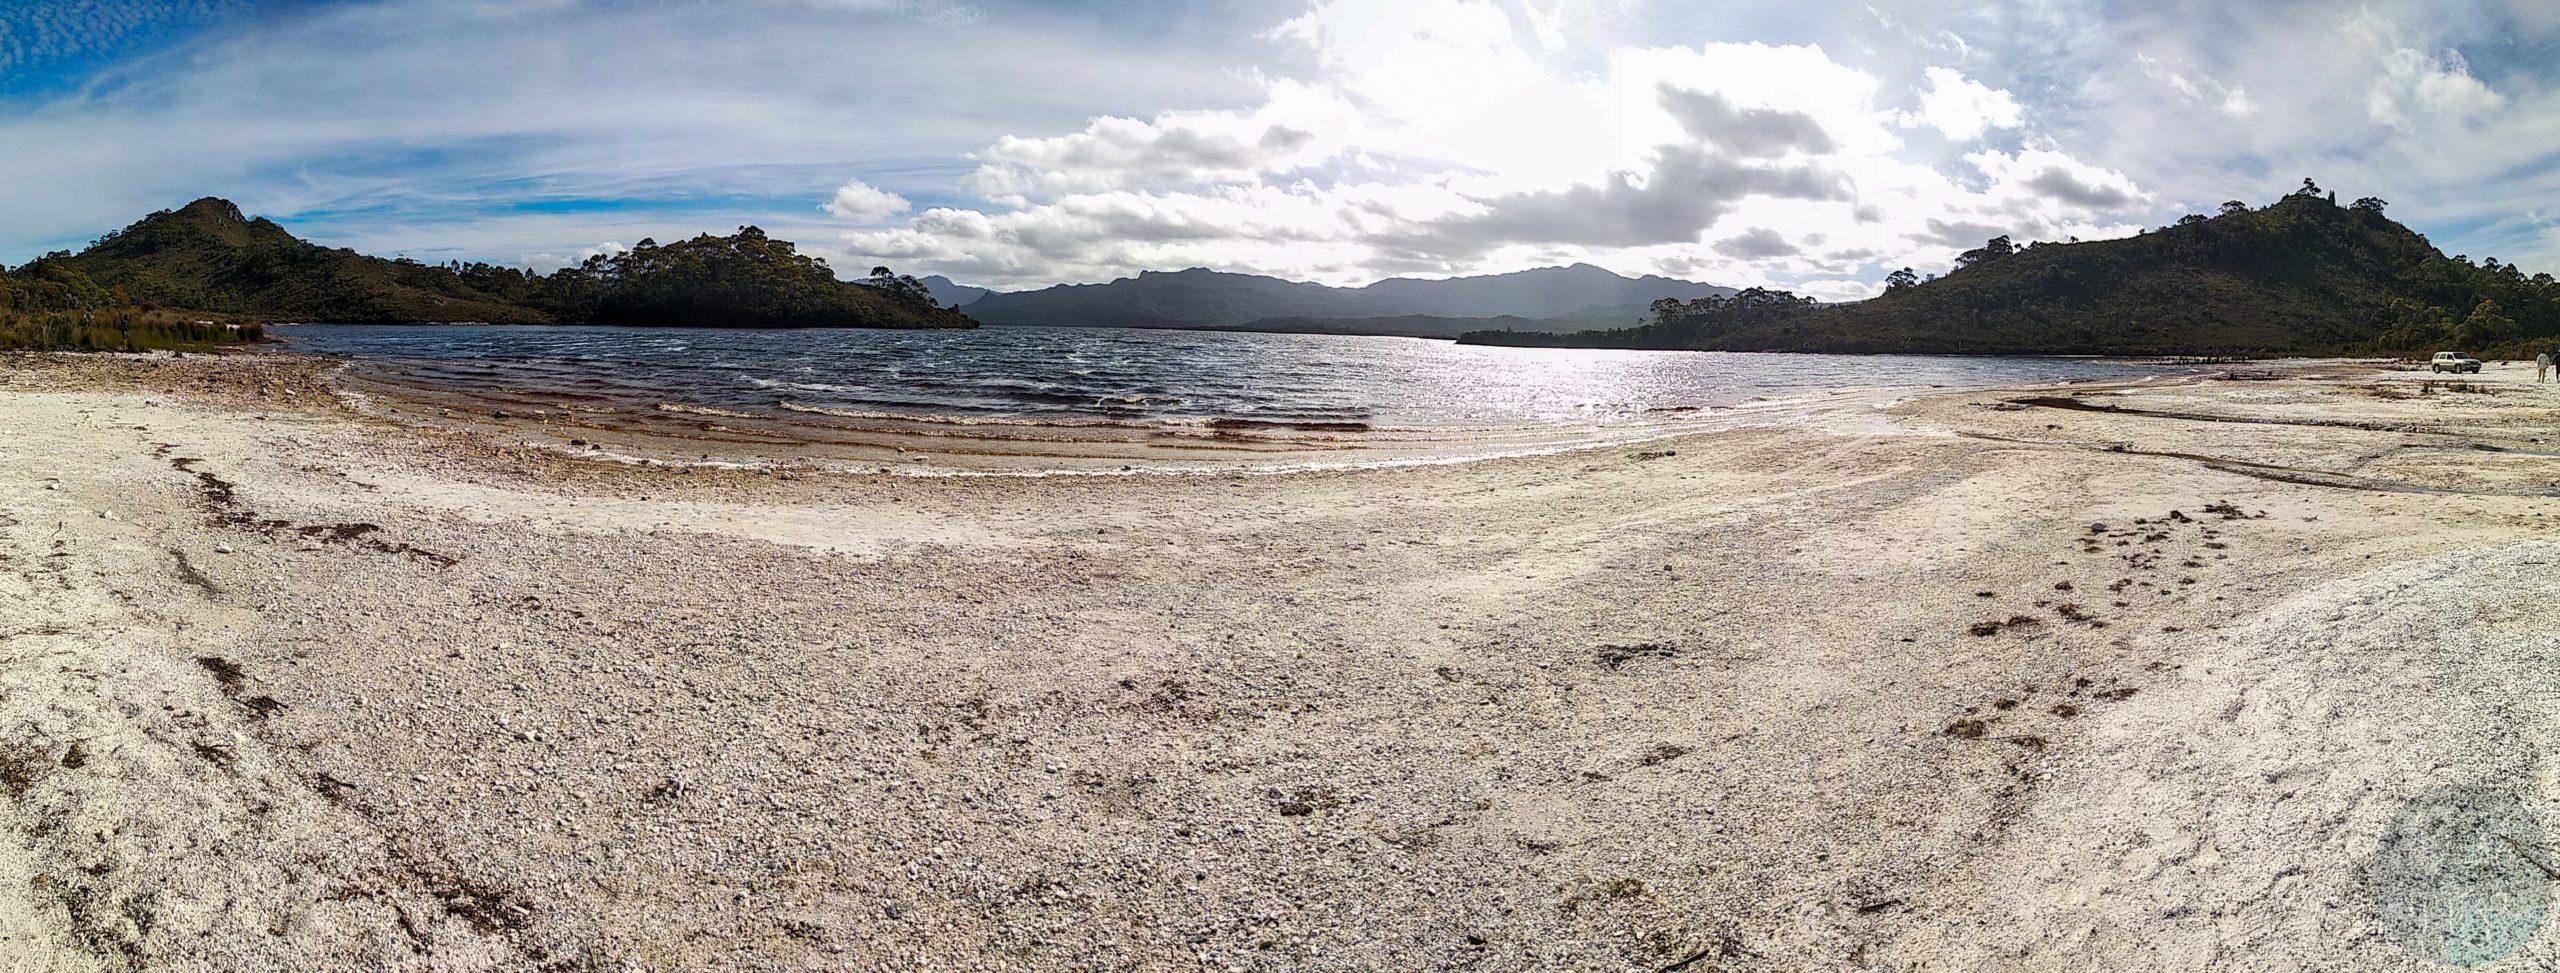 A panorama of Teds Beach campground, free if you have the Park pass! - © dMb 2020 (oops, wrong watermark hihi)